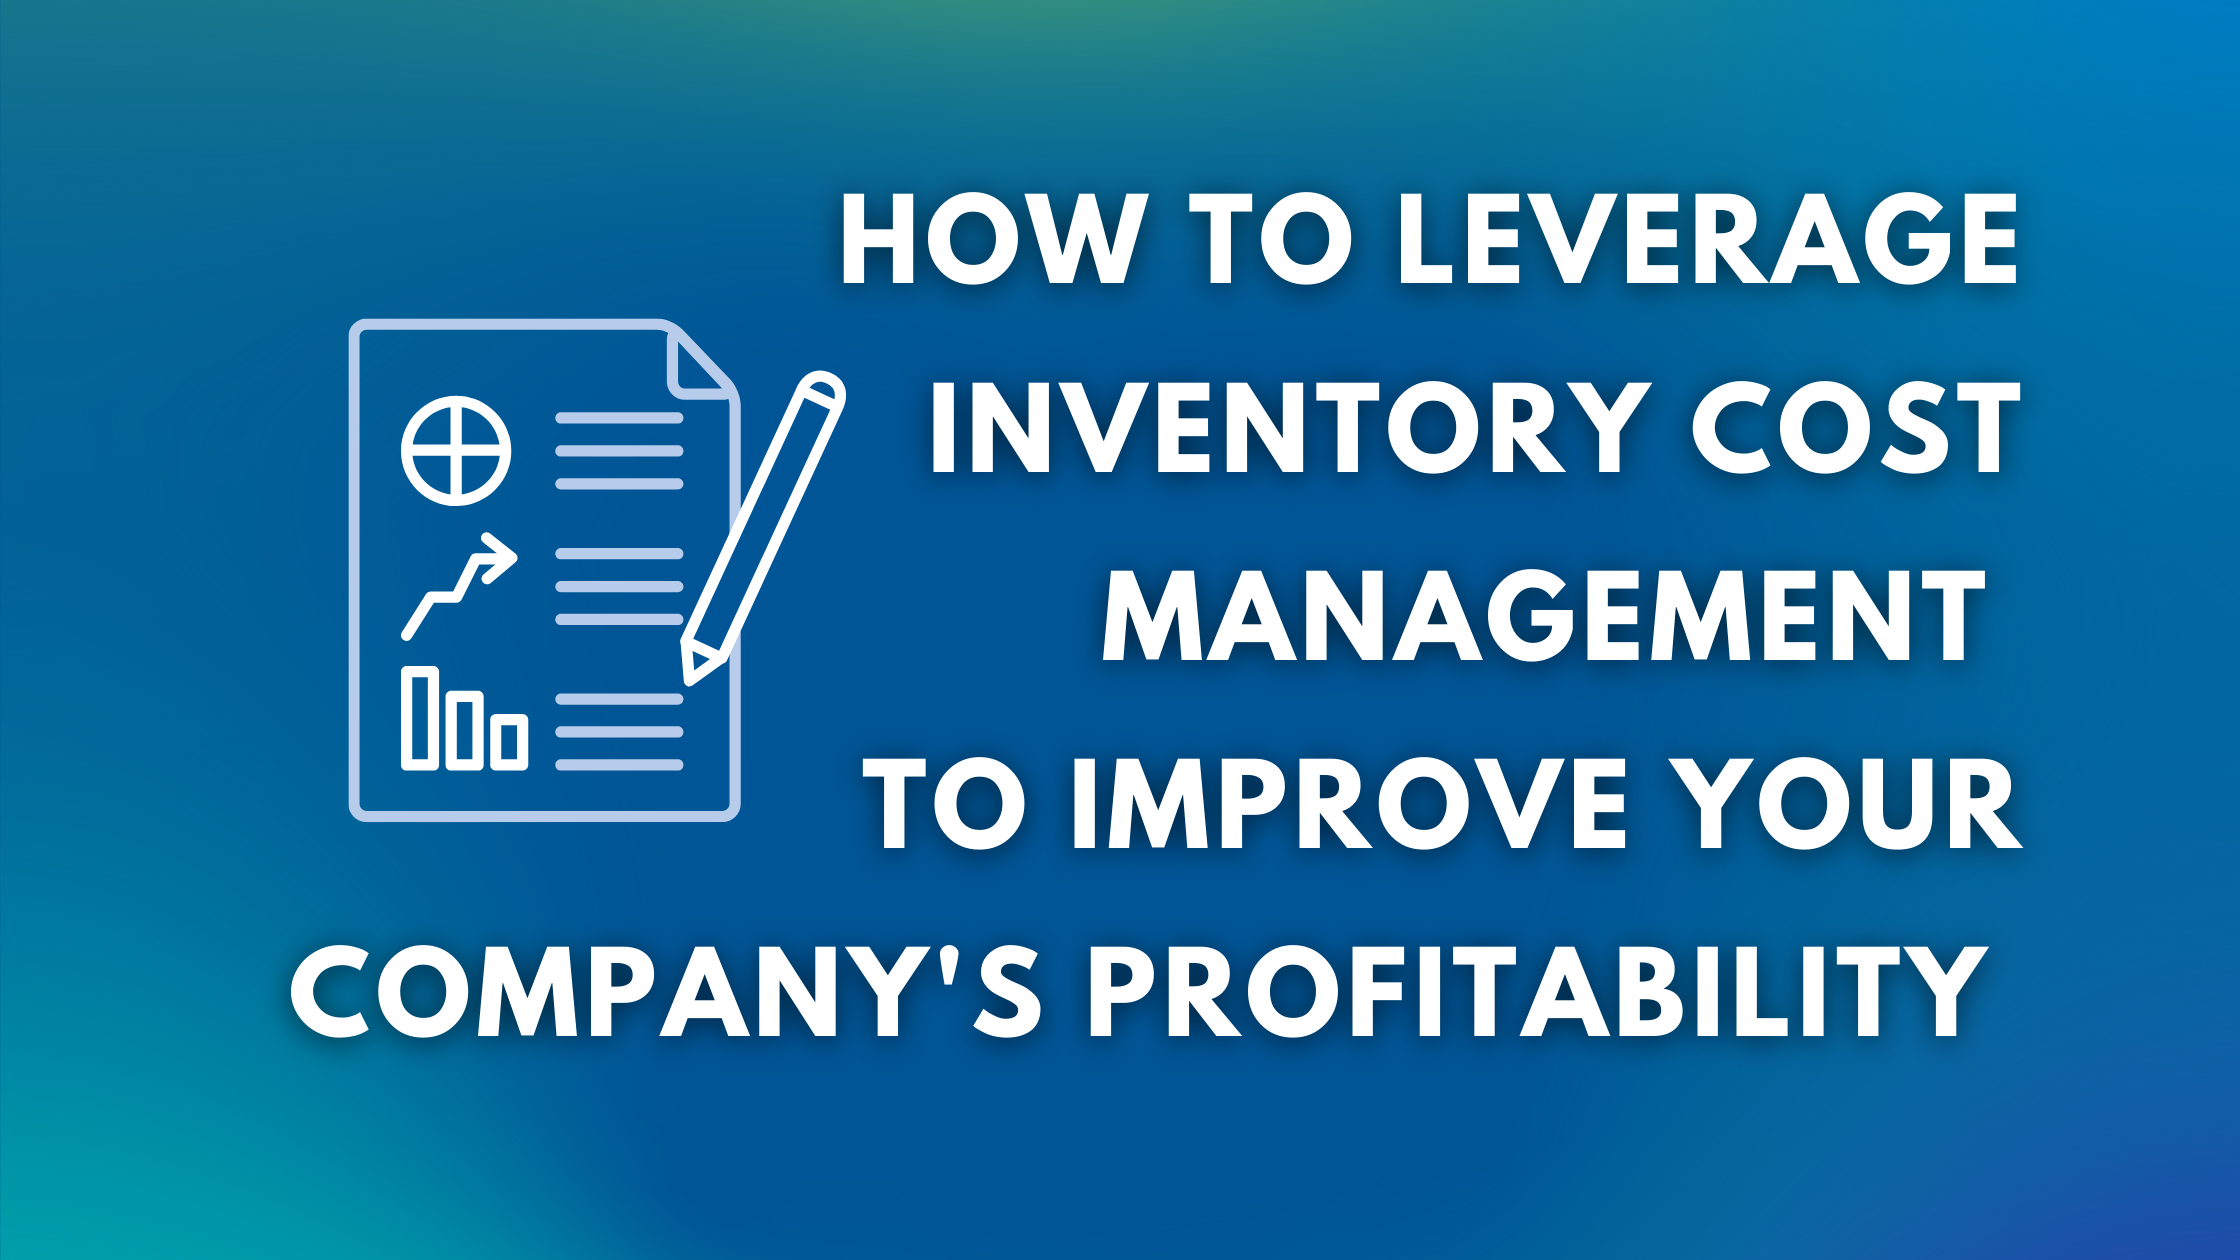 How to Leverage Inventory Cost Management to Improve Your Company's Profitability